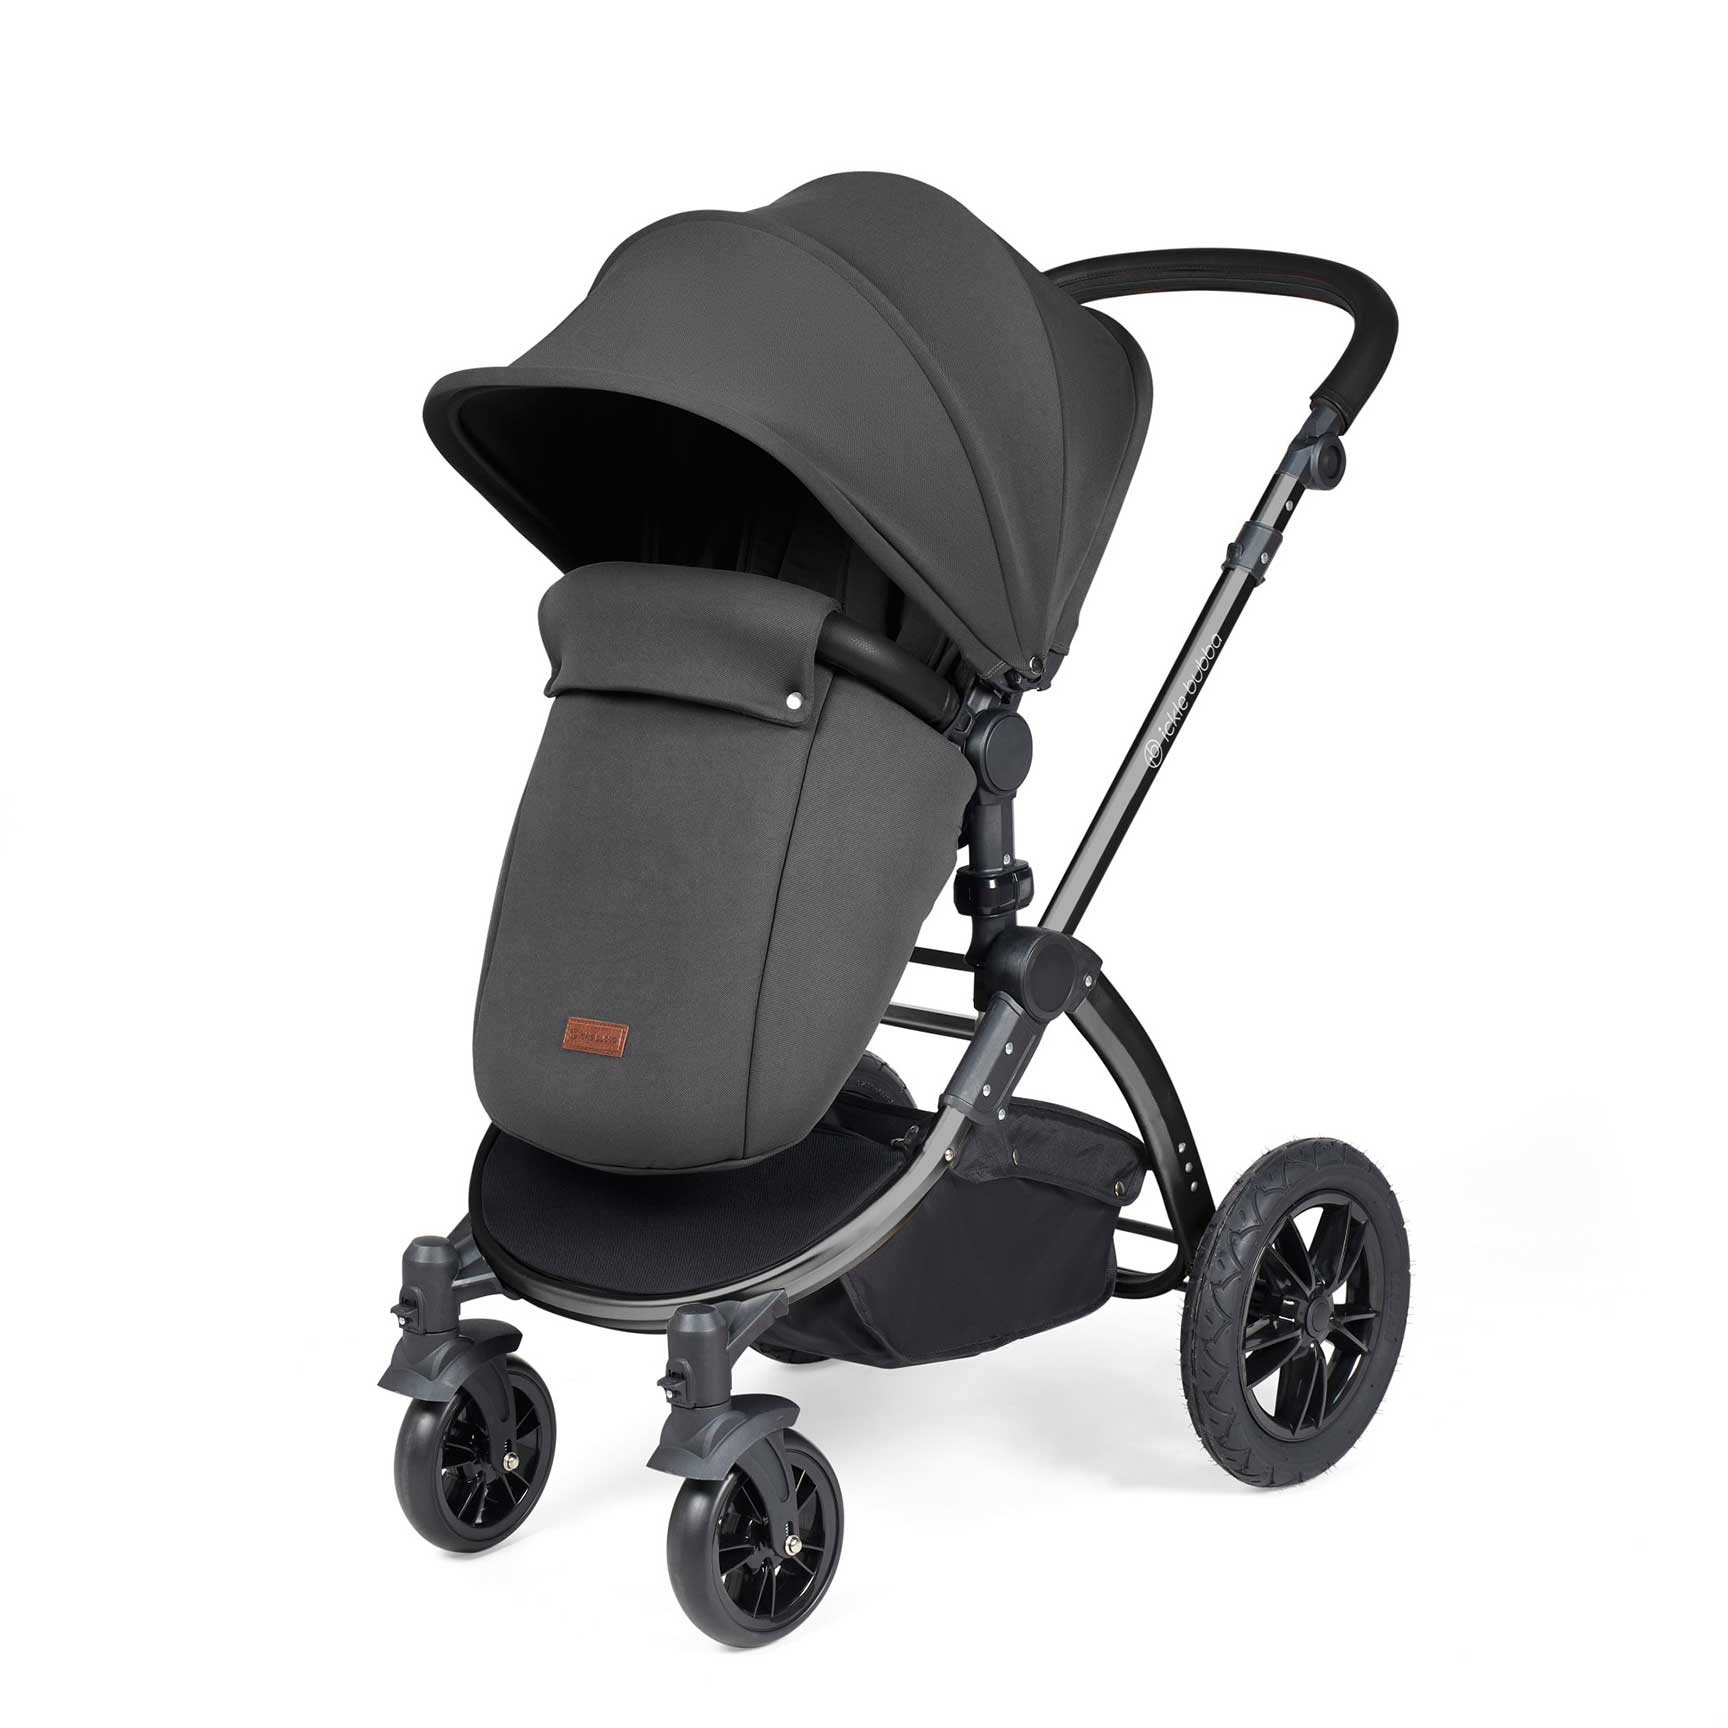 Ickle Bubba Stomp Luxe All-in-One Travel System with Isofix Base in Black/Charcoal Grey/Black Travel Systems 10-011-300-206 5056515026450